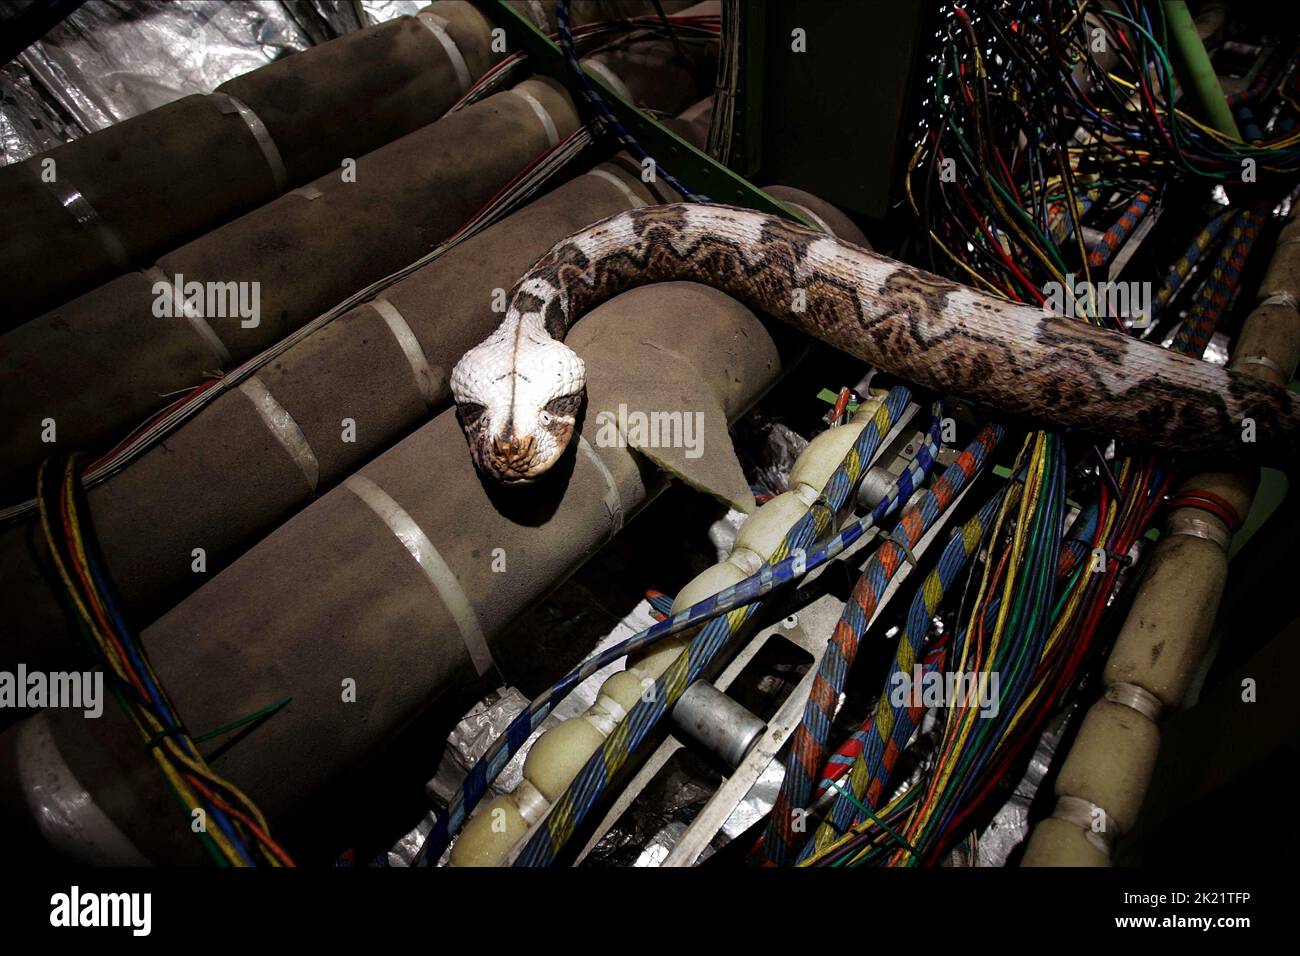 GABOON VIPER SNAKE, SNAKES ON A PLANE, 2006 Stock Photo